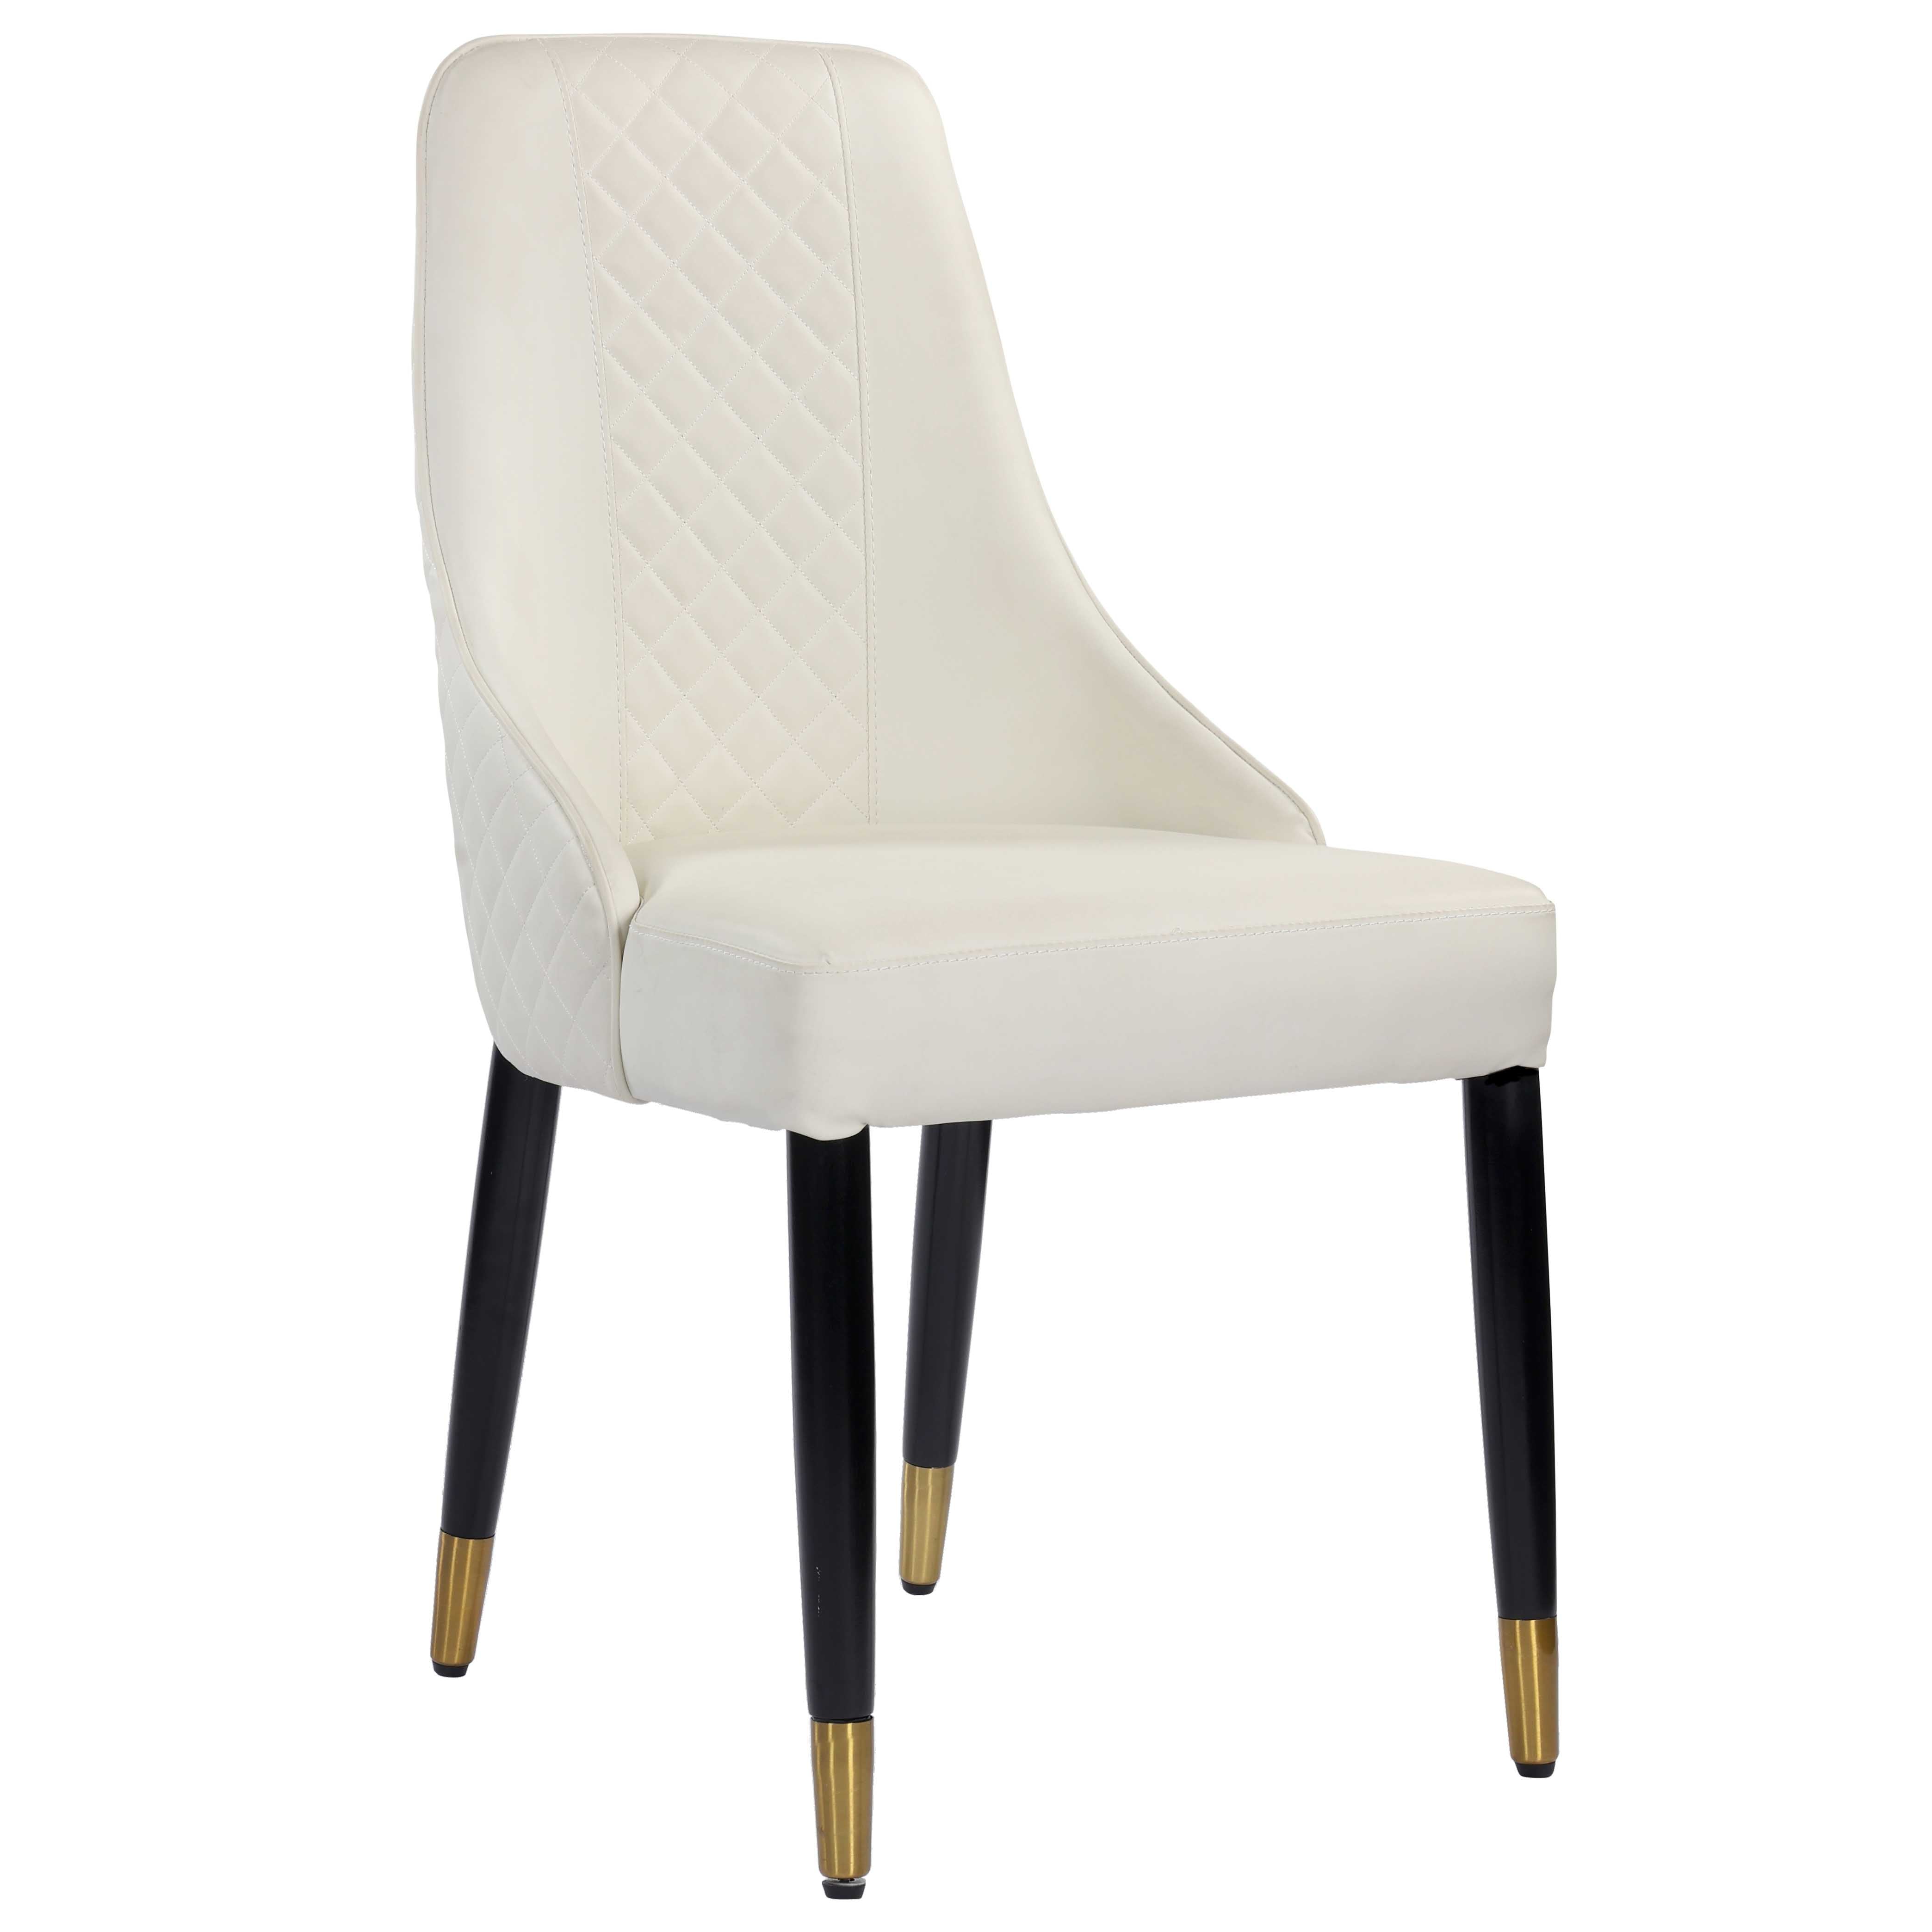 Elena Leather upholstered Dining chair with Gold Finish Metal Legs - White